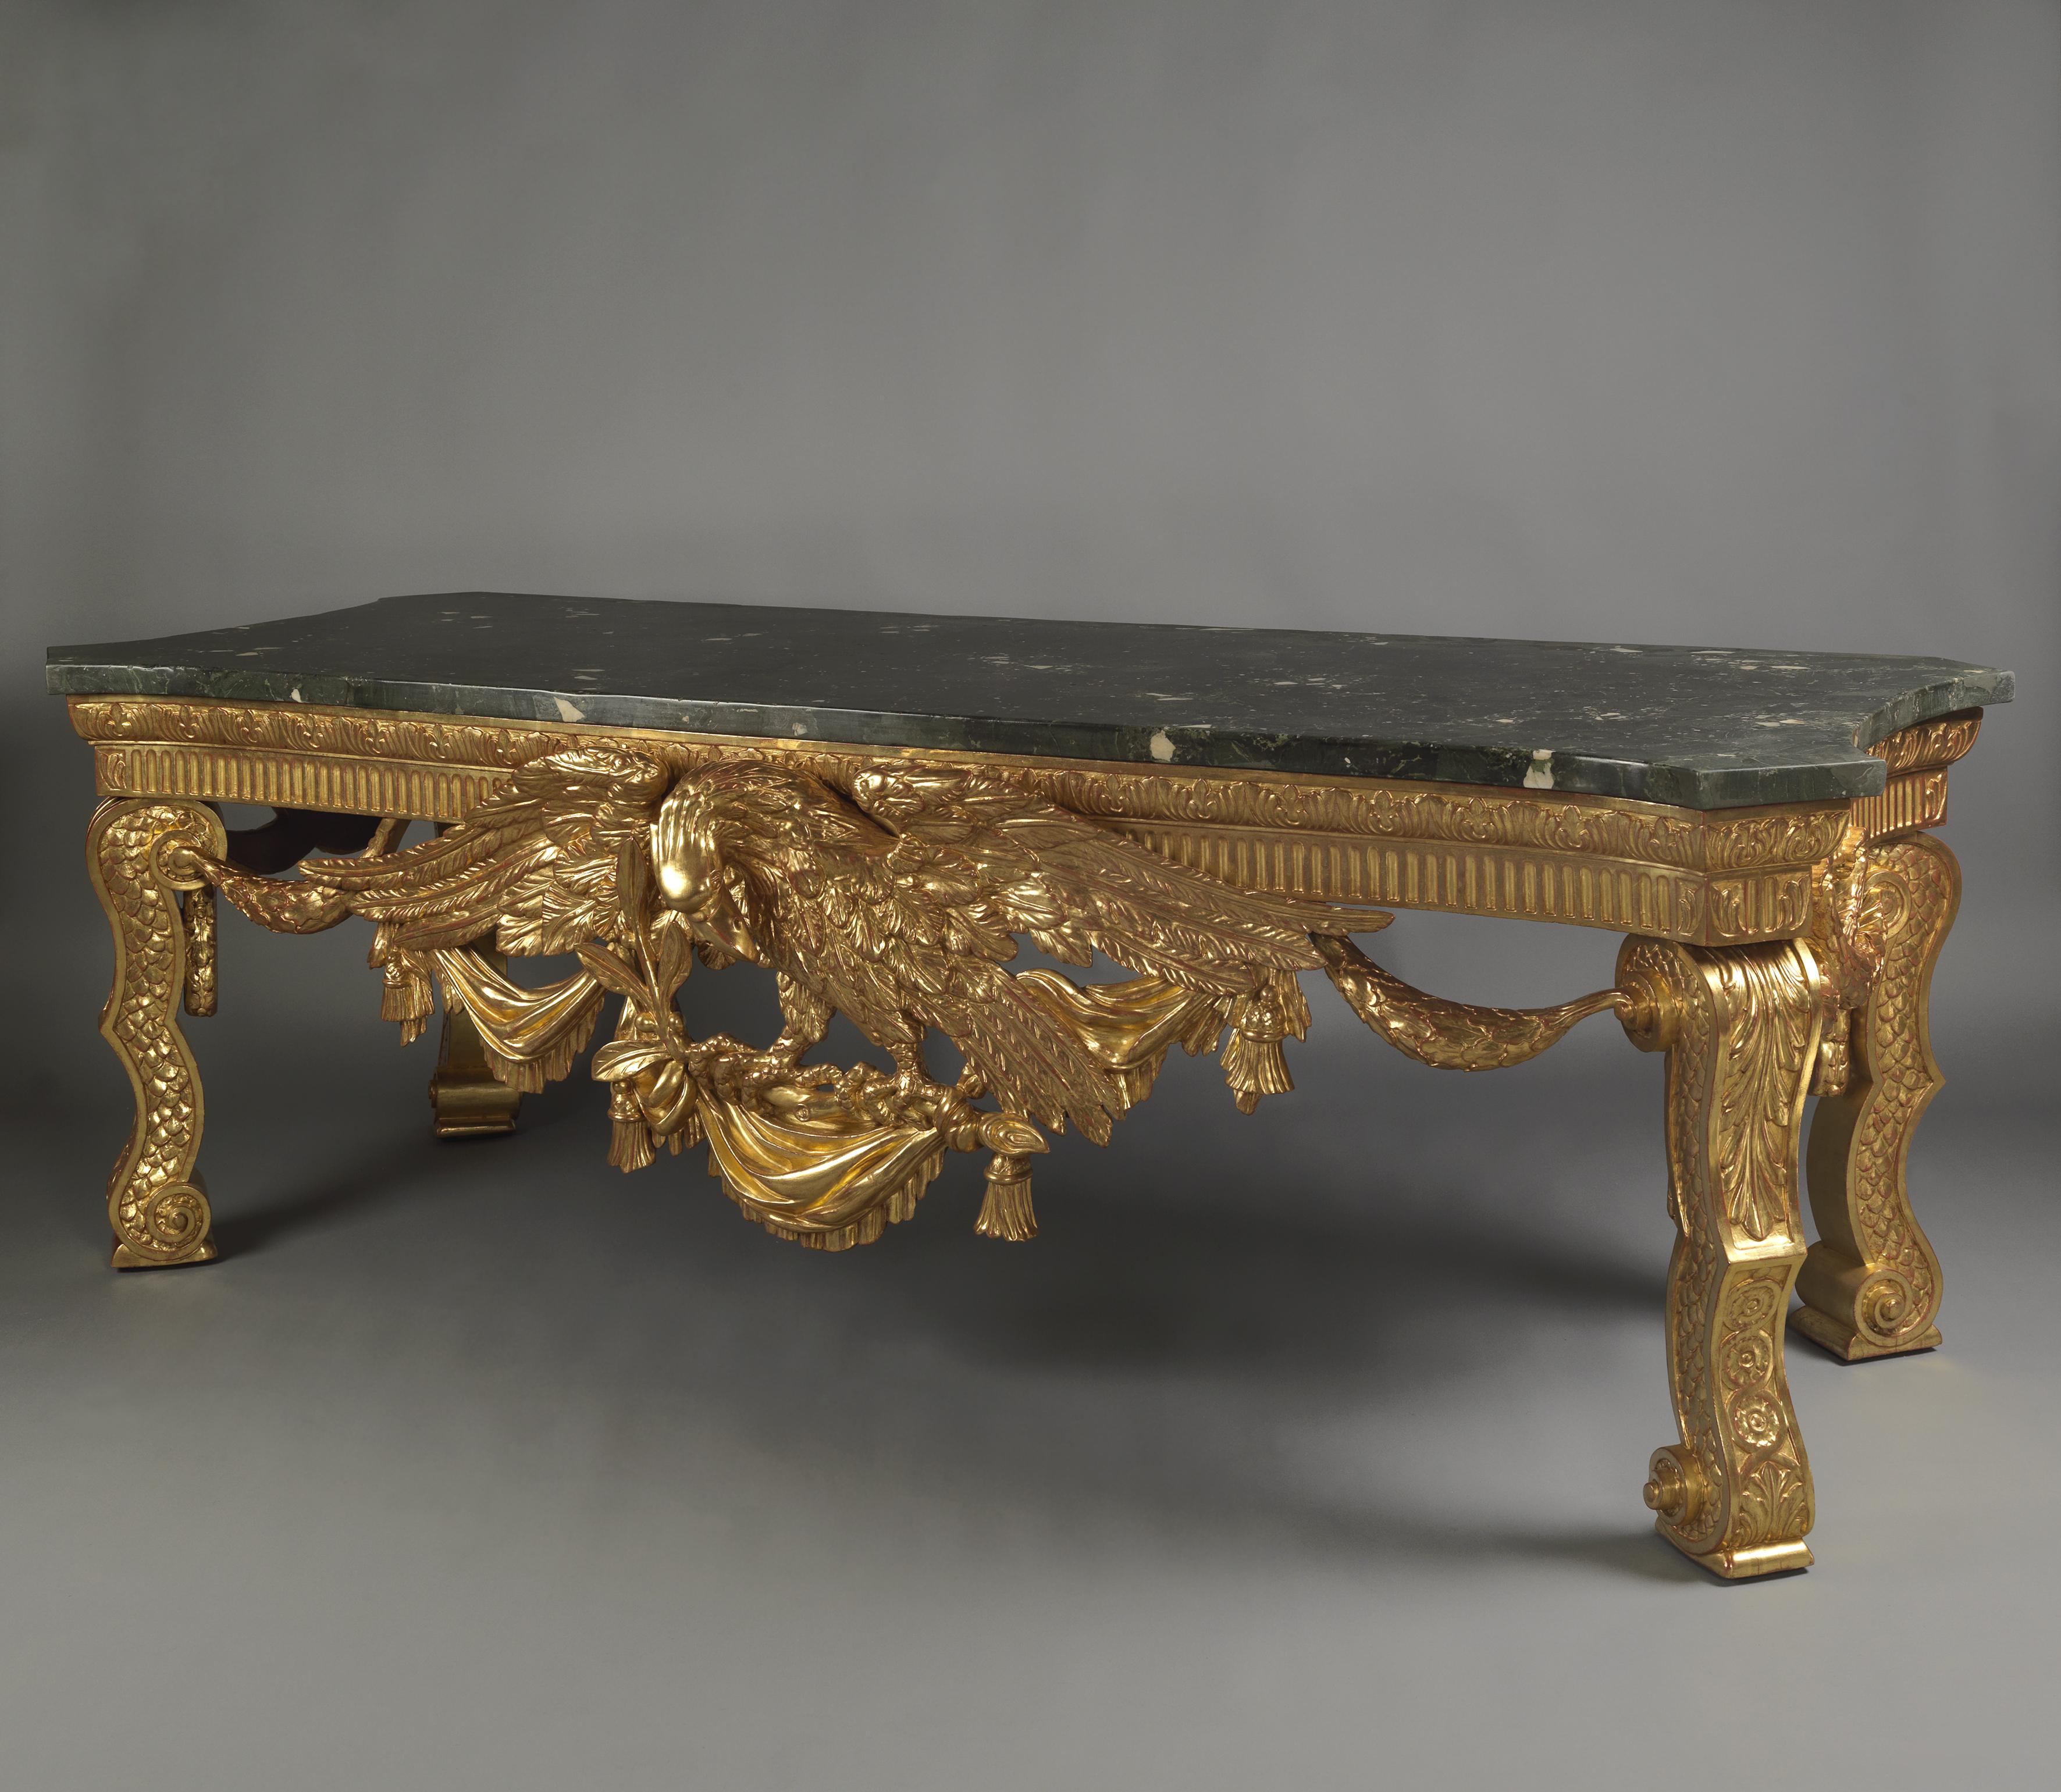 An impressive George II style giltwood console table in the manner of William Kent.

English, circa 1900, incorporating some 18th century carved elements. 

This large and impressive carved giltwood side table has a shaped rectangular Verde